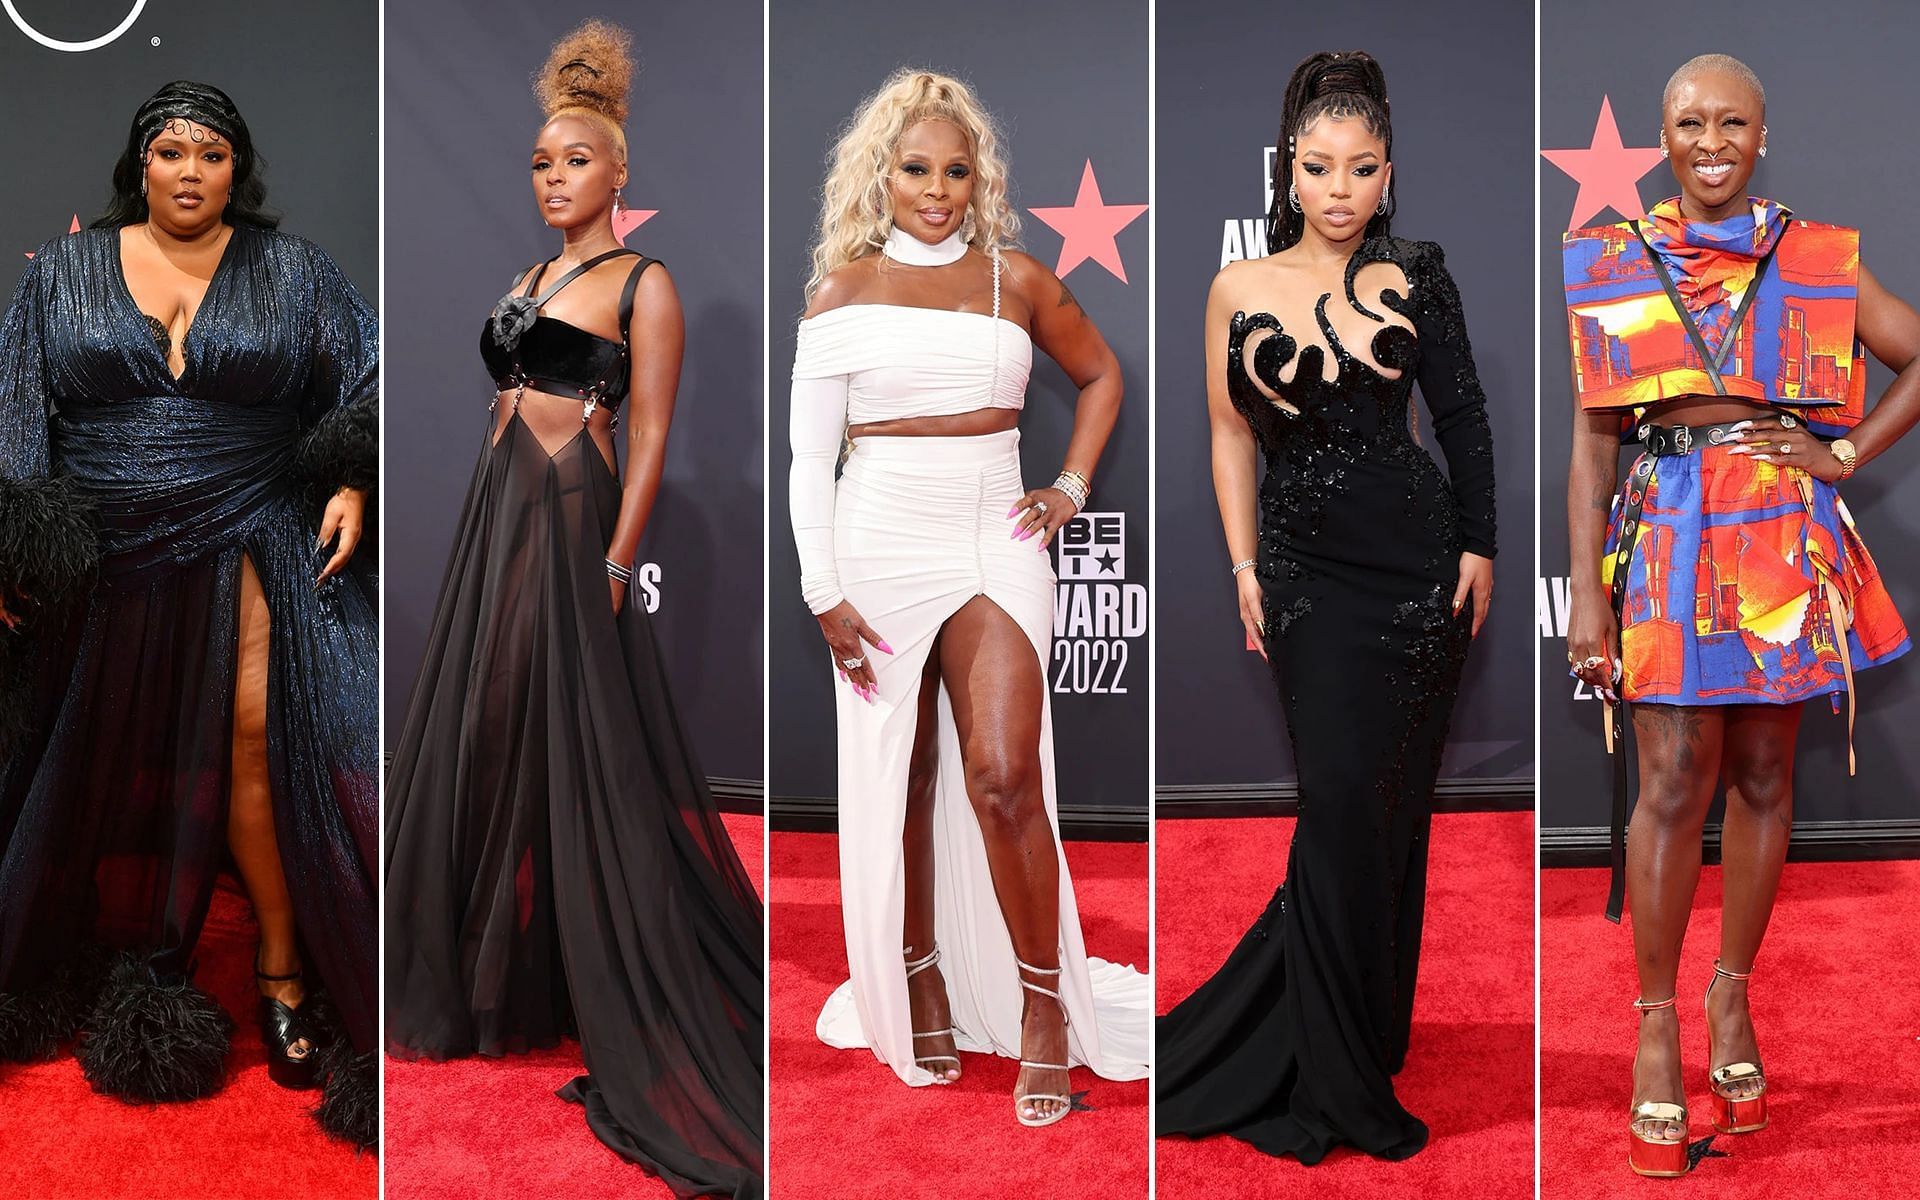 BET Awards 2022 5 bestdressed women and what they wore